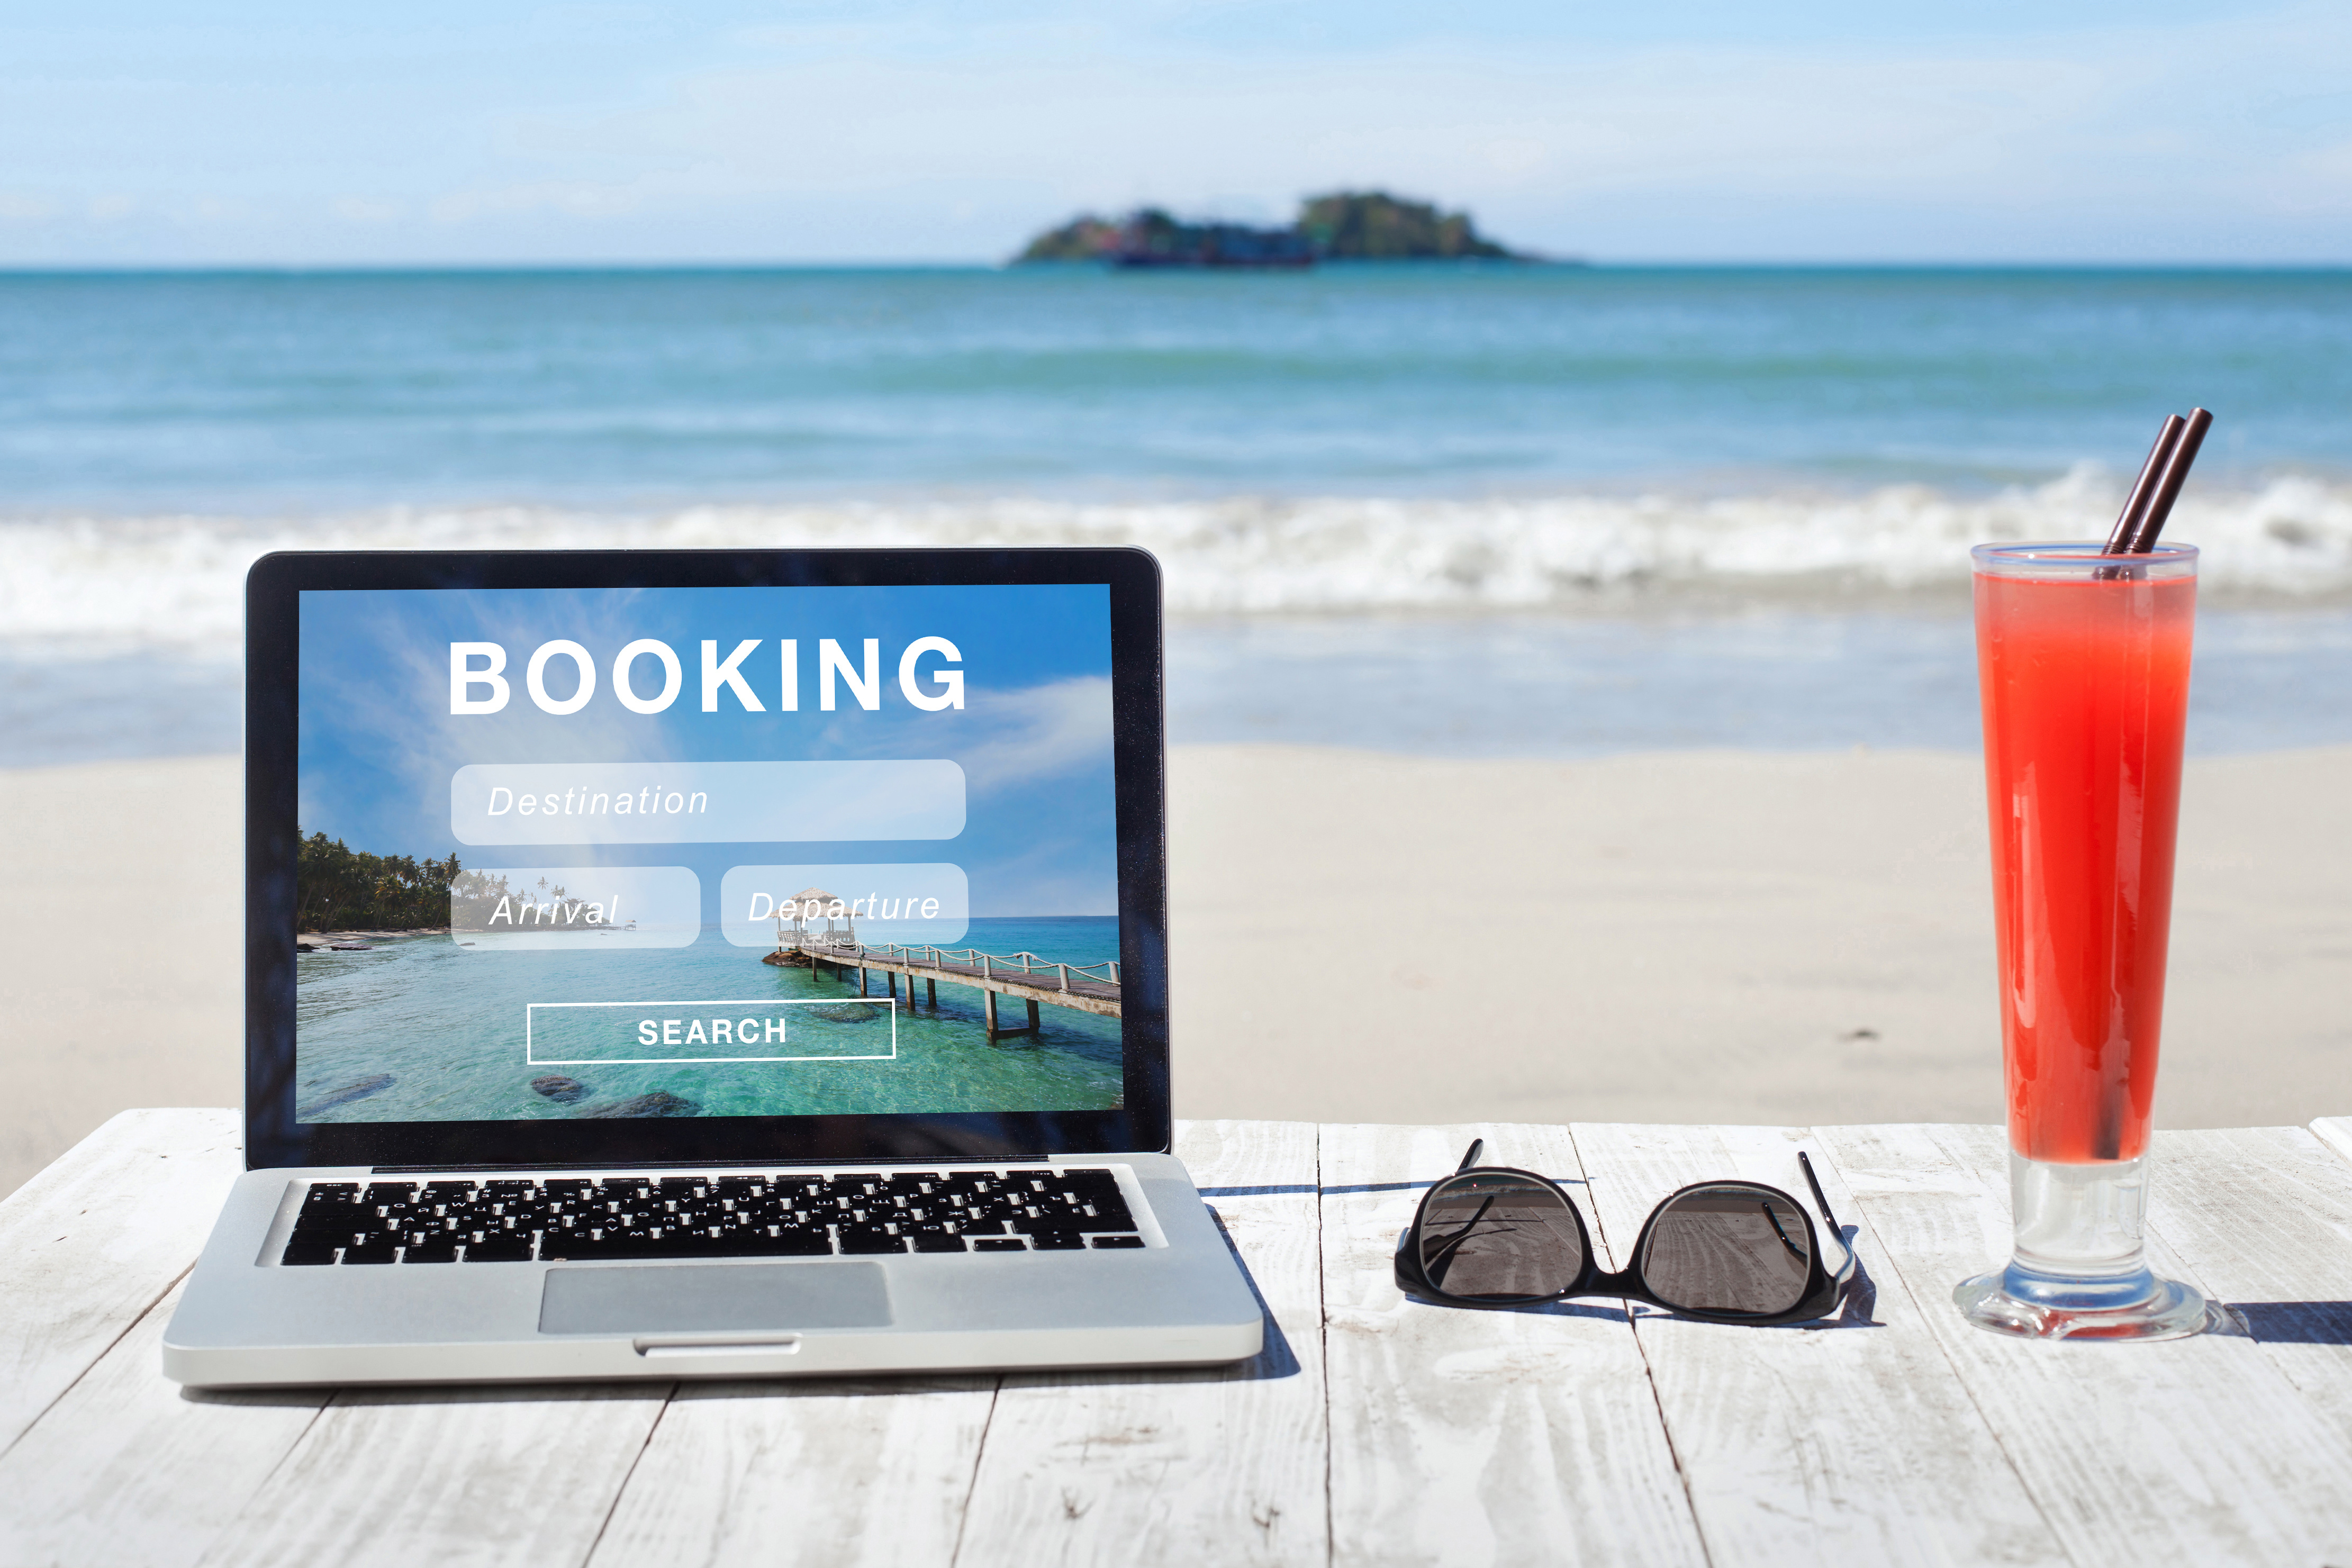 5 Reasons Why Your Hotel Online Booking System Is Failing You